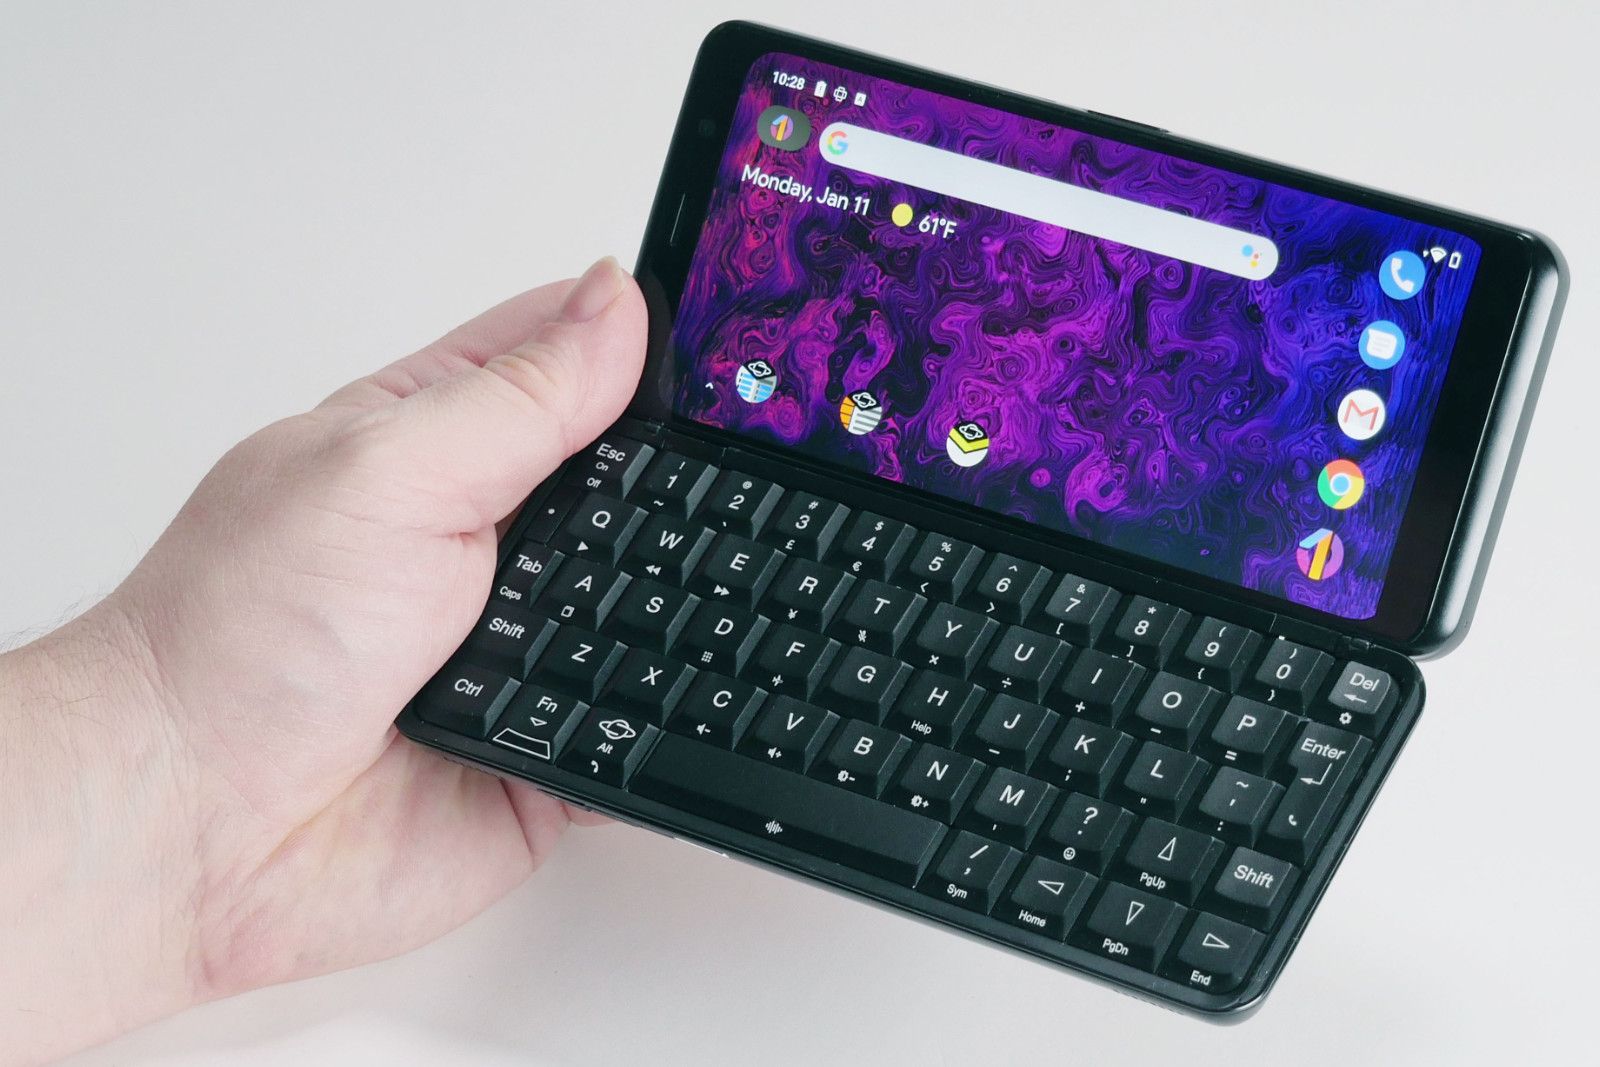 Astro Slide 5G is first 5G phone with a full QWERTY keyboard